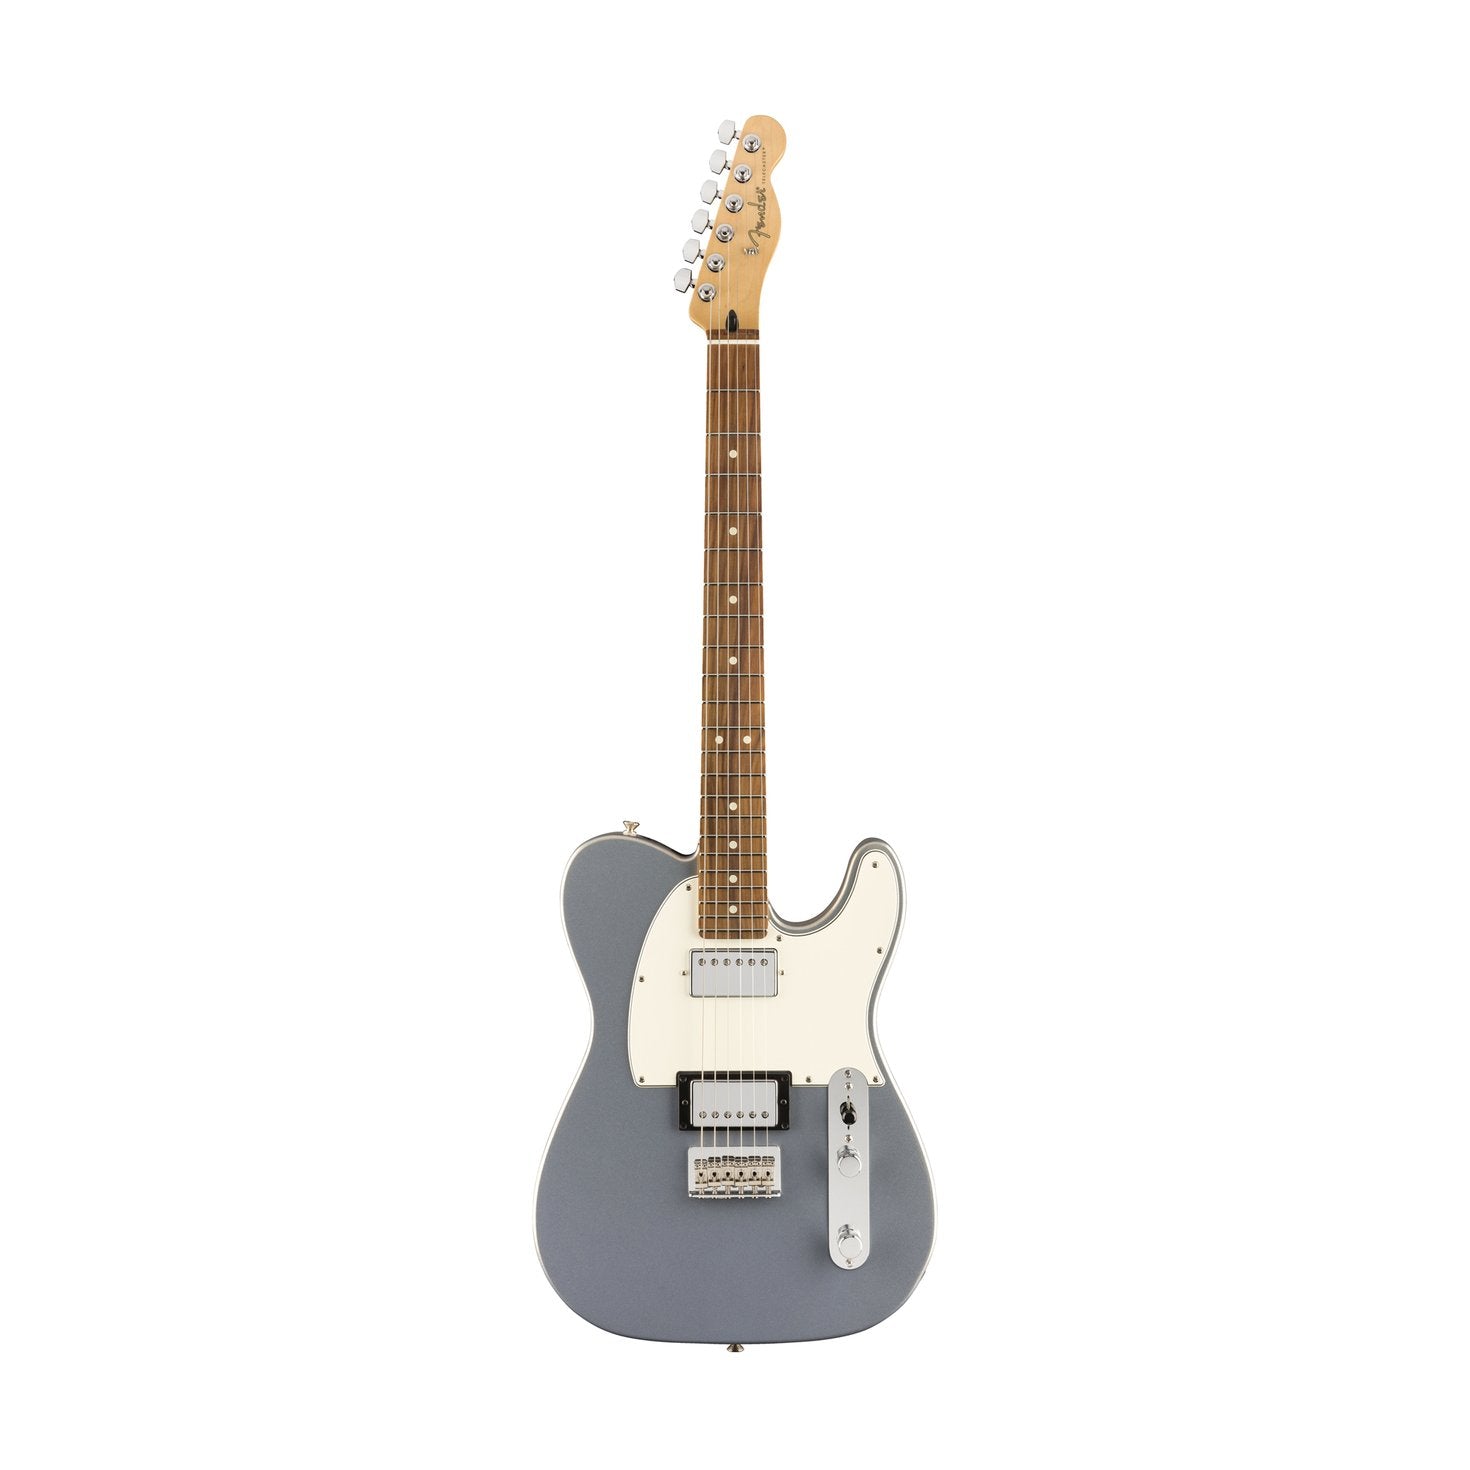 Fender Player HH Telecaster Electric Guitar, Pau Ferro FB, Silver, FENDER, ELECTRIC GUITAR, fender-eletric-guitar-f03-014-5233-581, ZOSO MUSIC SDN BHD